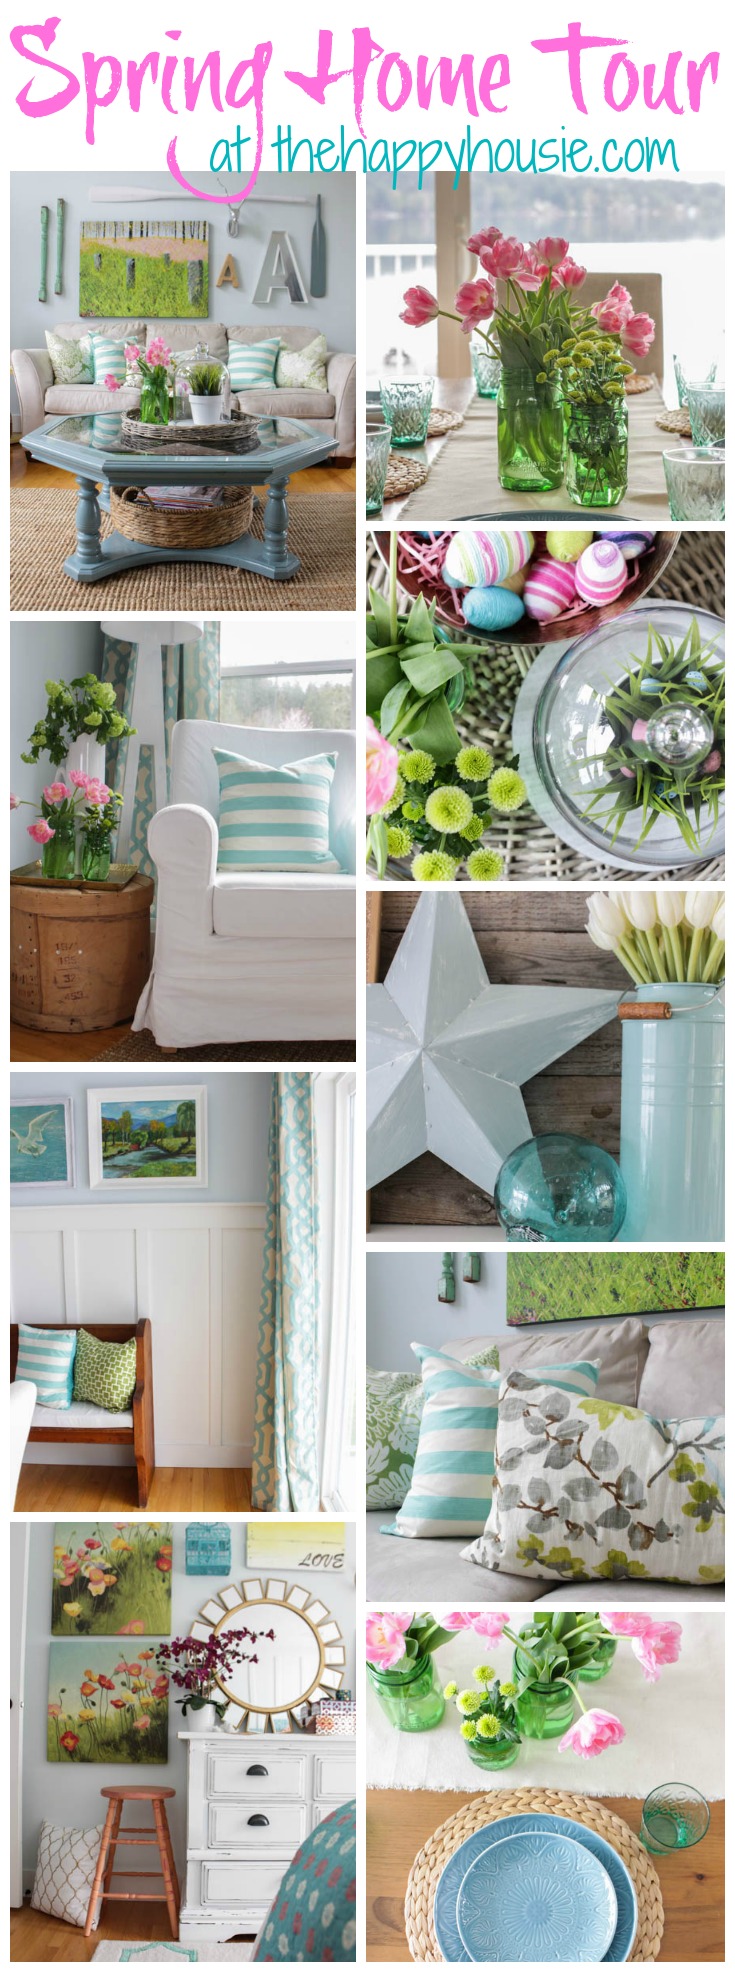 Tons of spring decor inspiration in this beautiful spring home tour at thehappyhousie.com